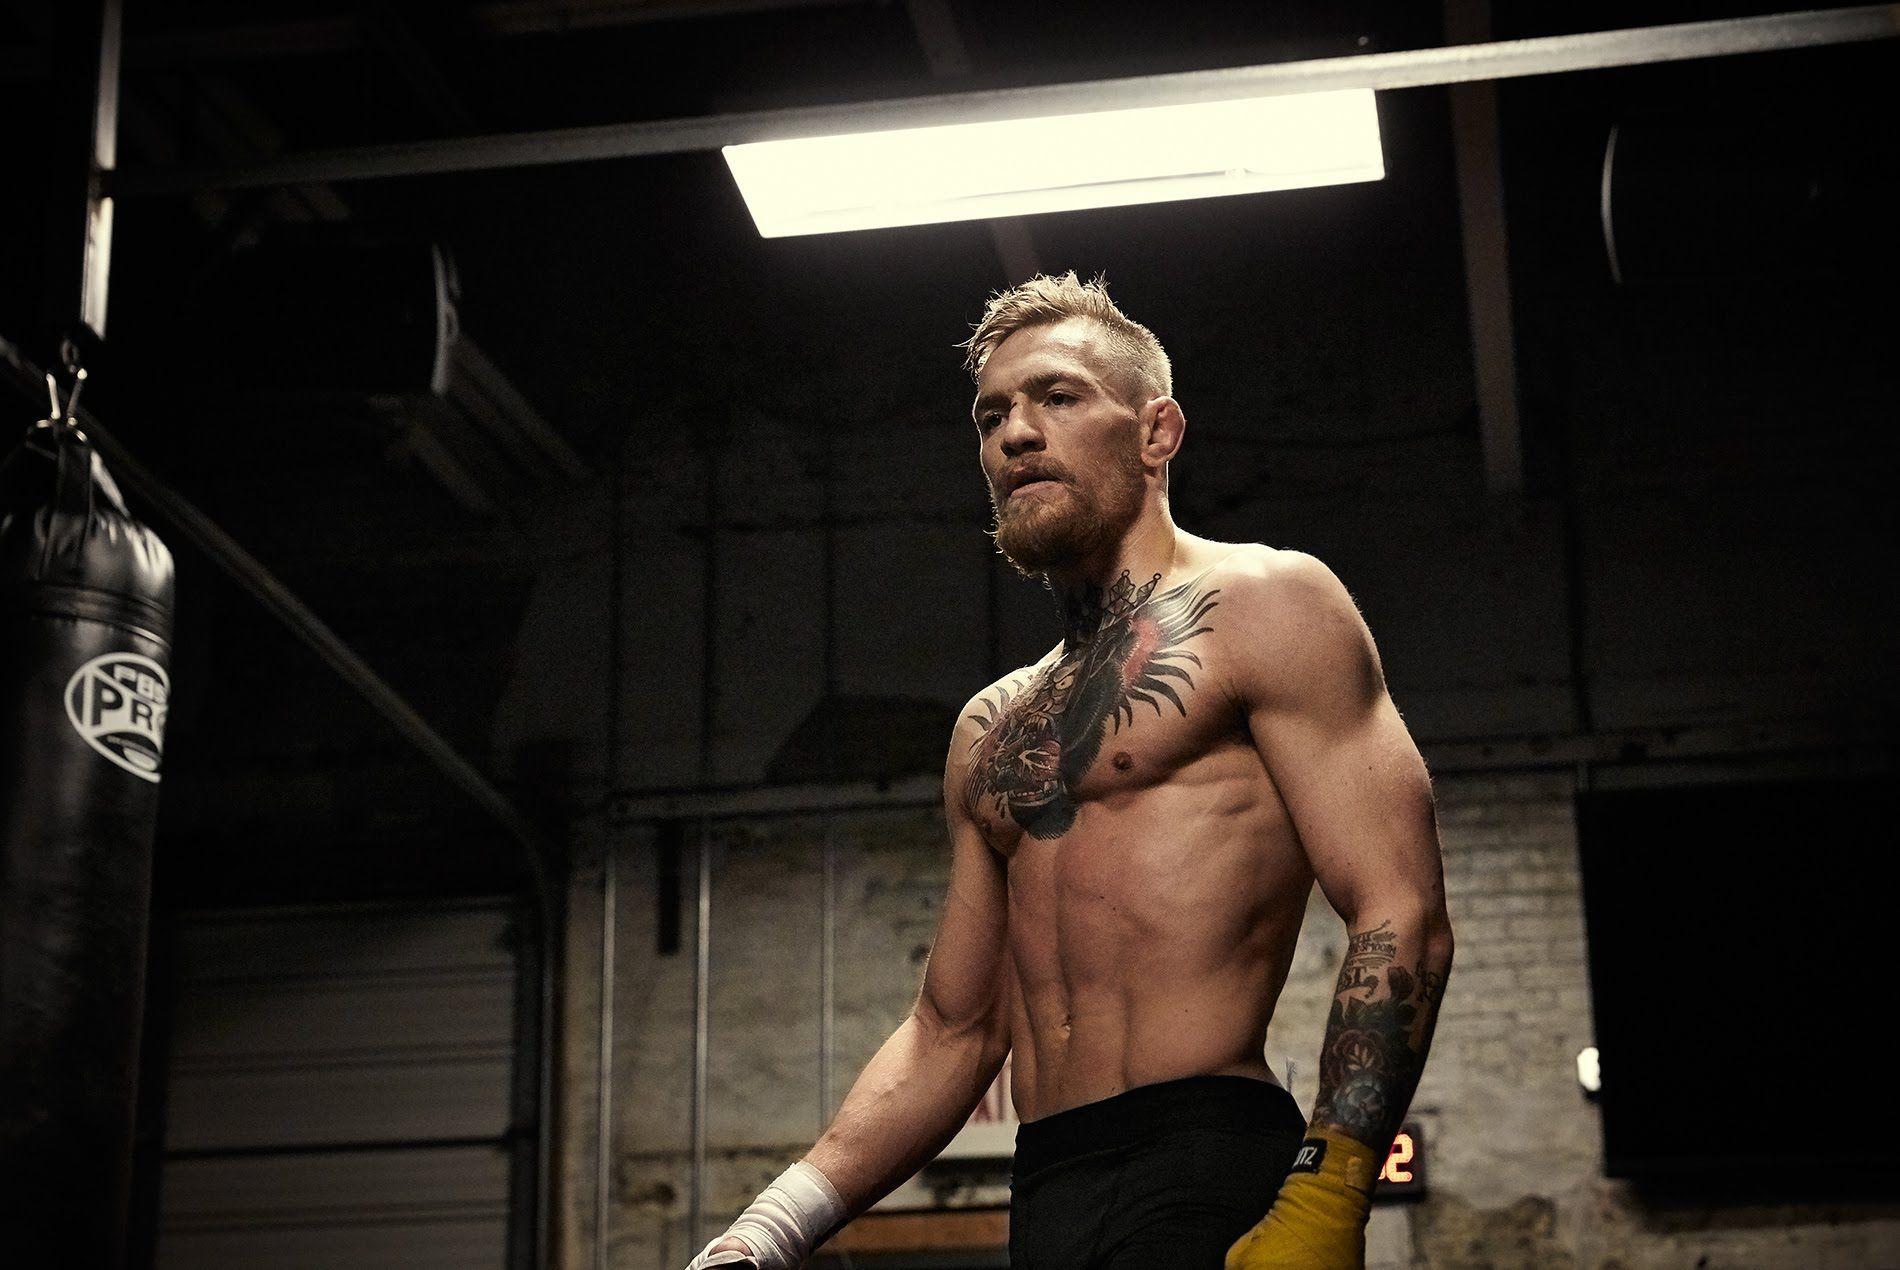 Conor McGregor HD Wallpaper Free Download in High Quality